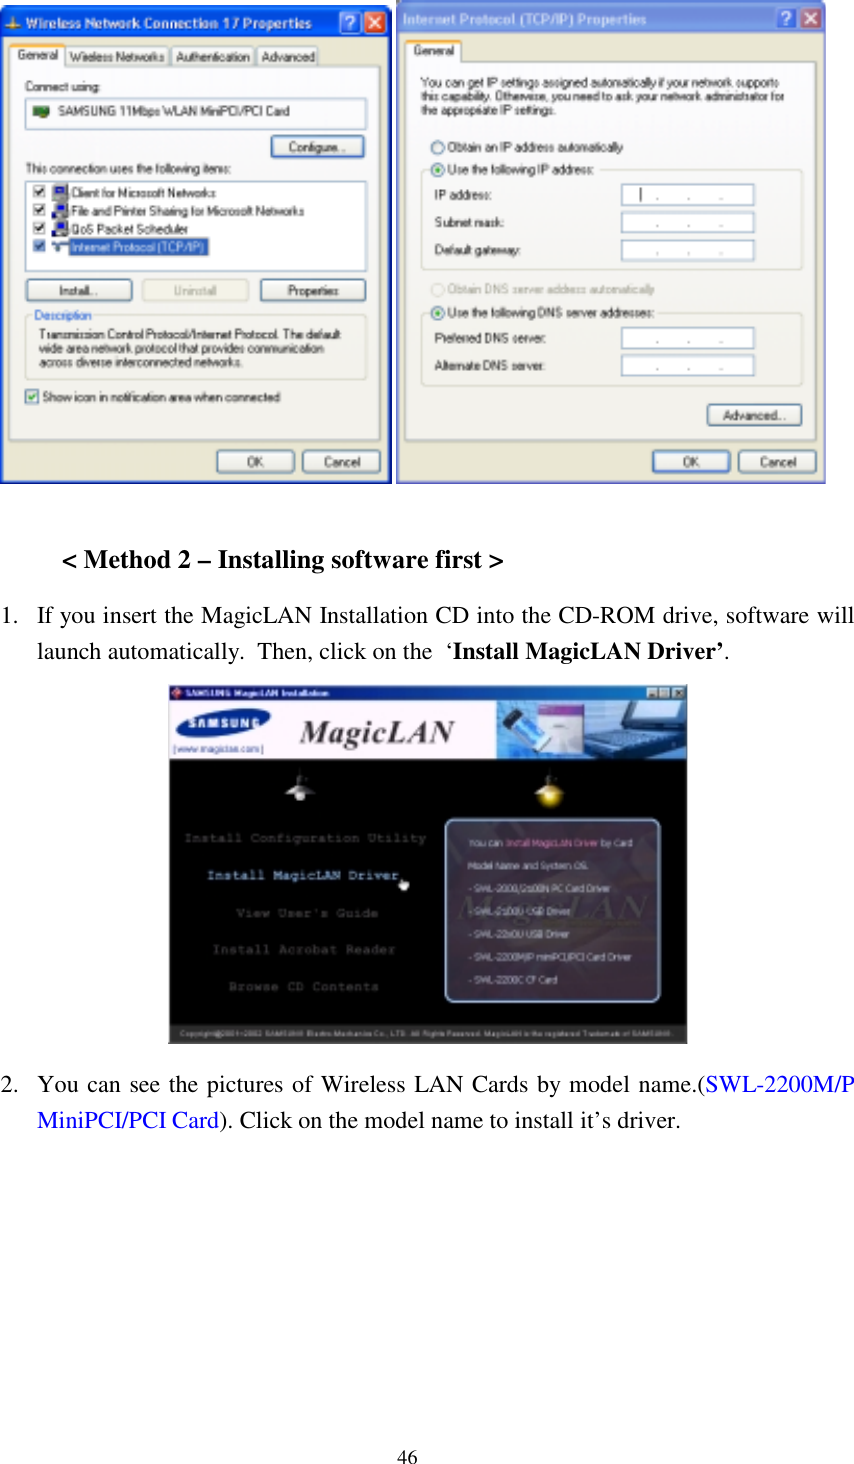  46     &lt; Method 2 – Installing software first &gt; 1.  If you insert the MagicLAN Installation CD into the CD-ROM drive, software will launch automatically.  Then, click on the  ‘Install MagicLAN Driver’.  2.  You can see the pictures of Wireless LAN Cards by model name.(SWL-2200M/P MiniPCI/PCI Card). Click on the model name to install it’s driver. 